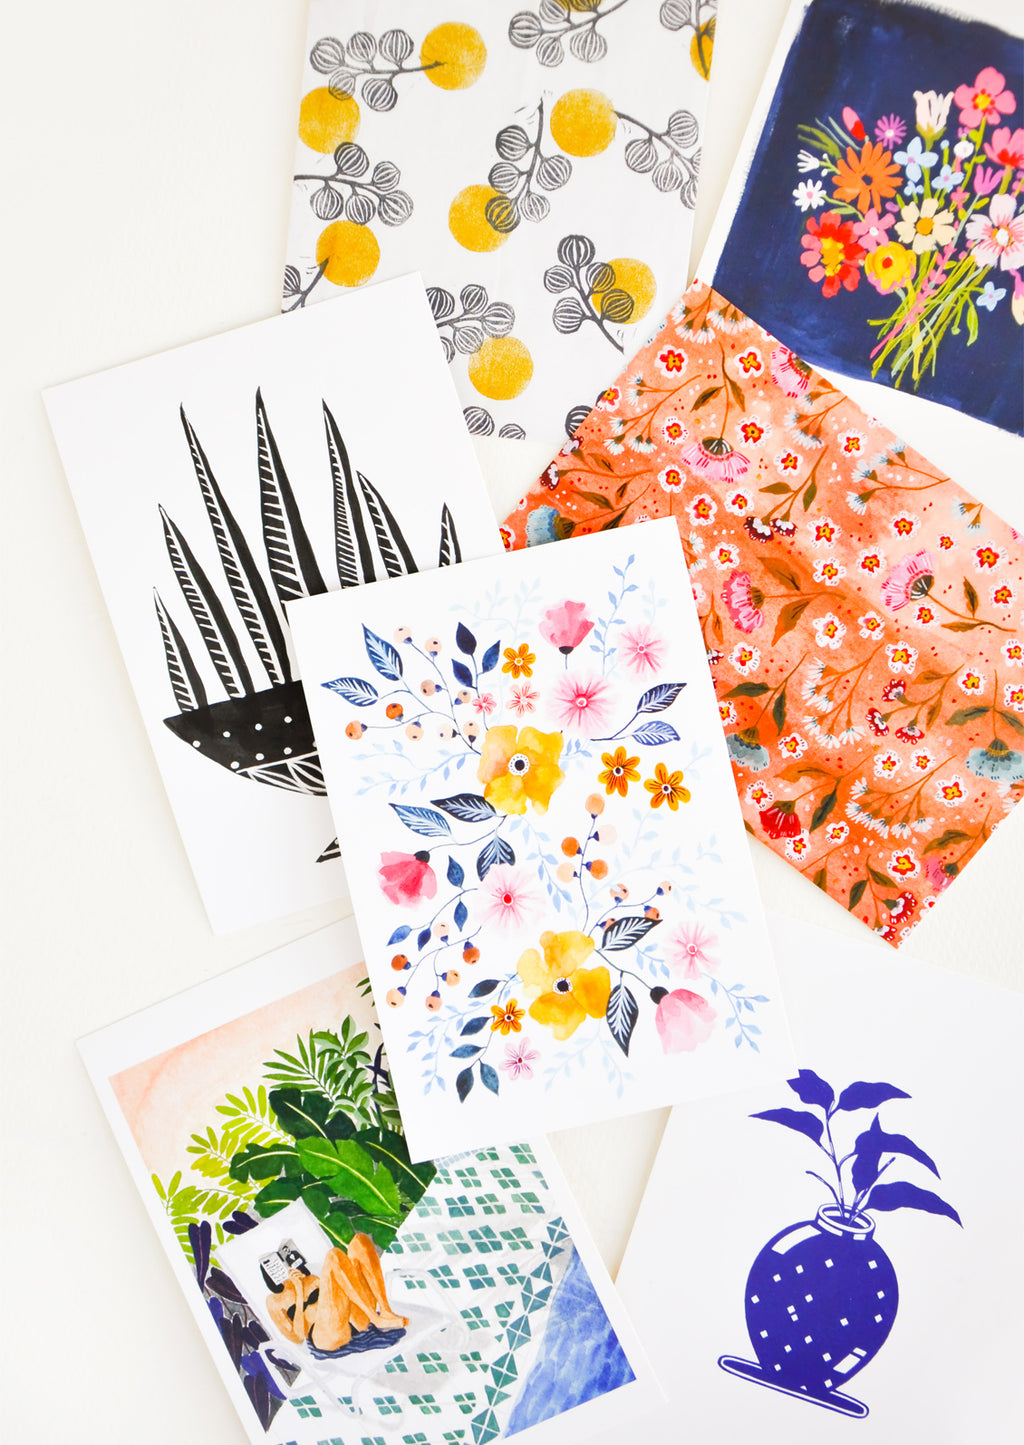 2: Product shot showing multiple styles of floral postcards.